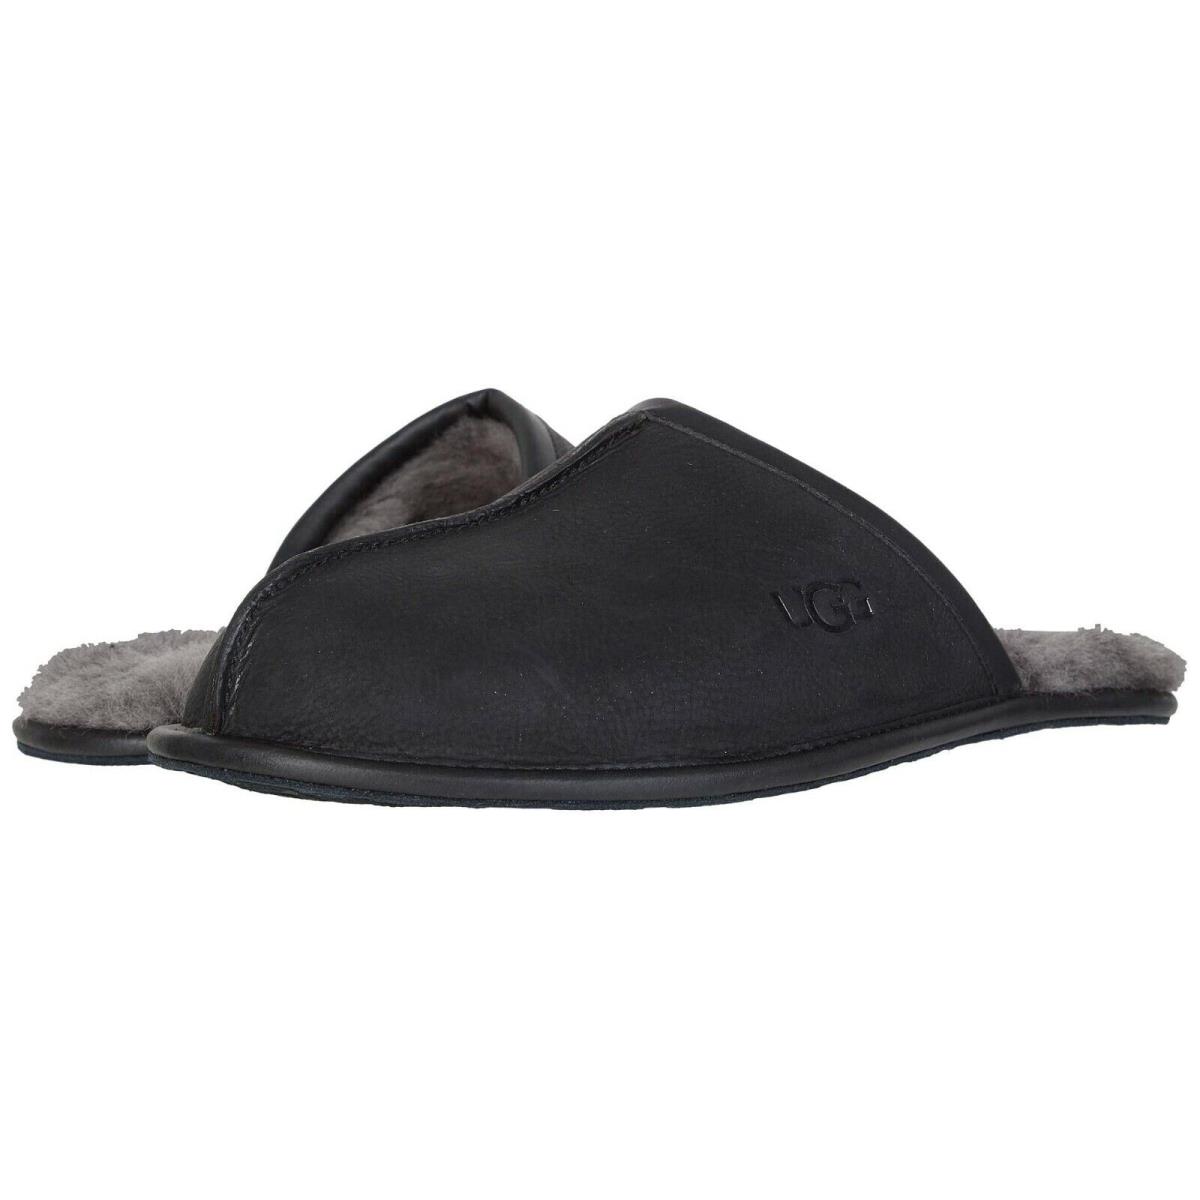 Ugg Mens Scuff Leather Cozy Slippers Shoes Black Tan 8 9 10 11 12